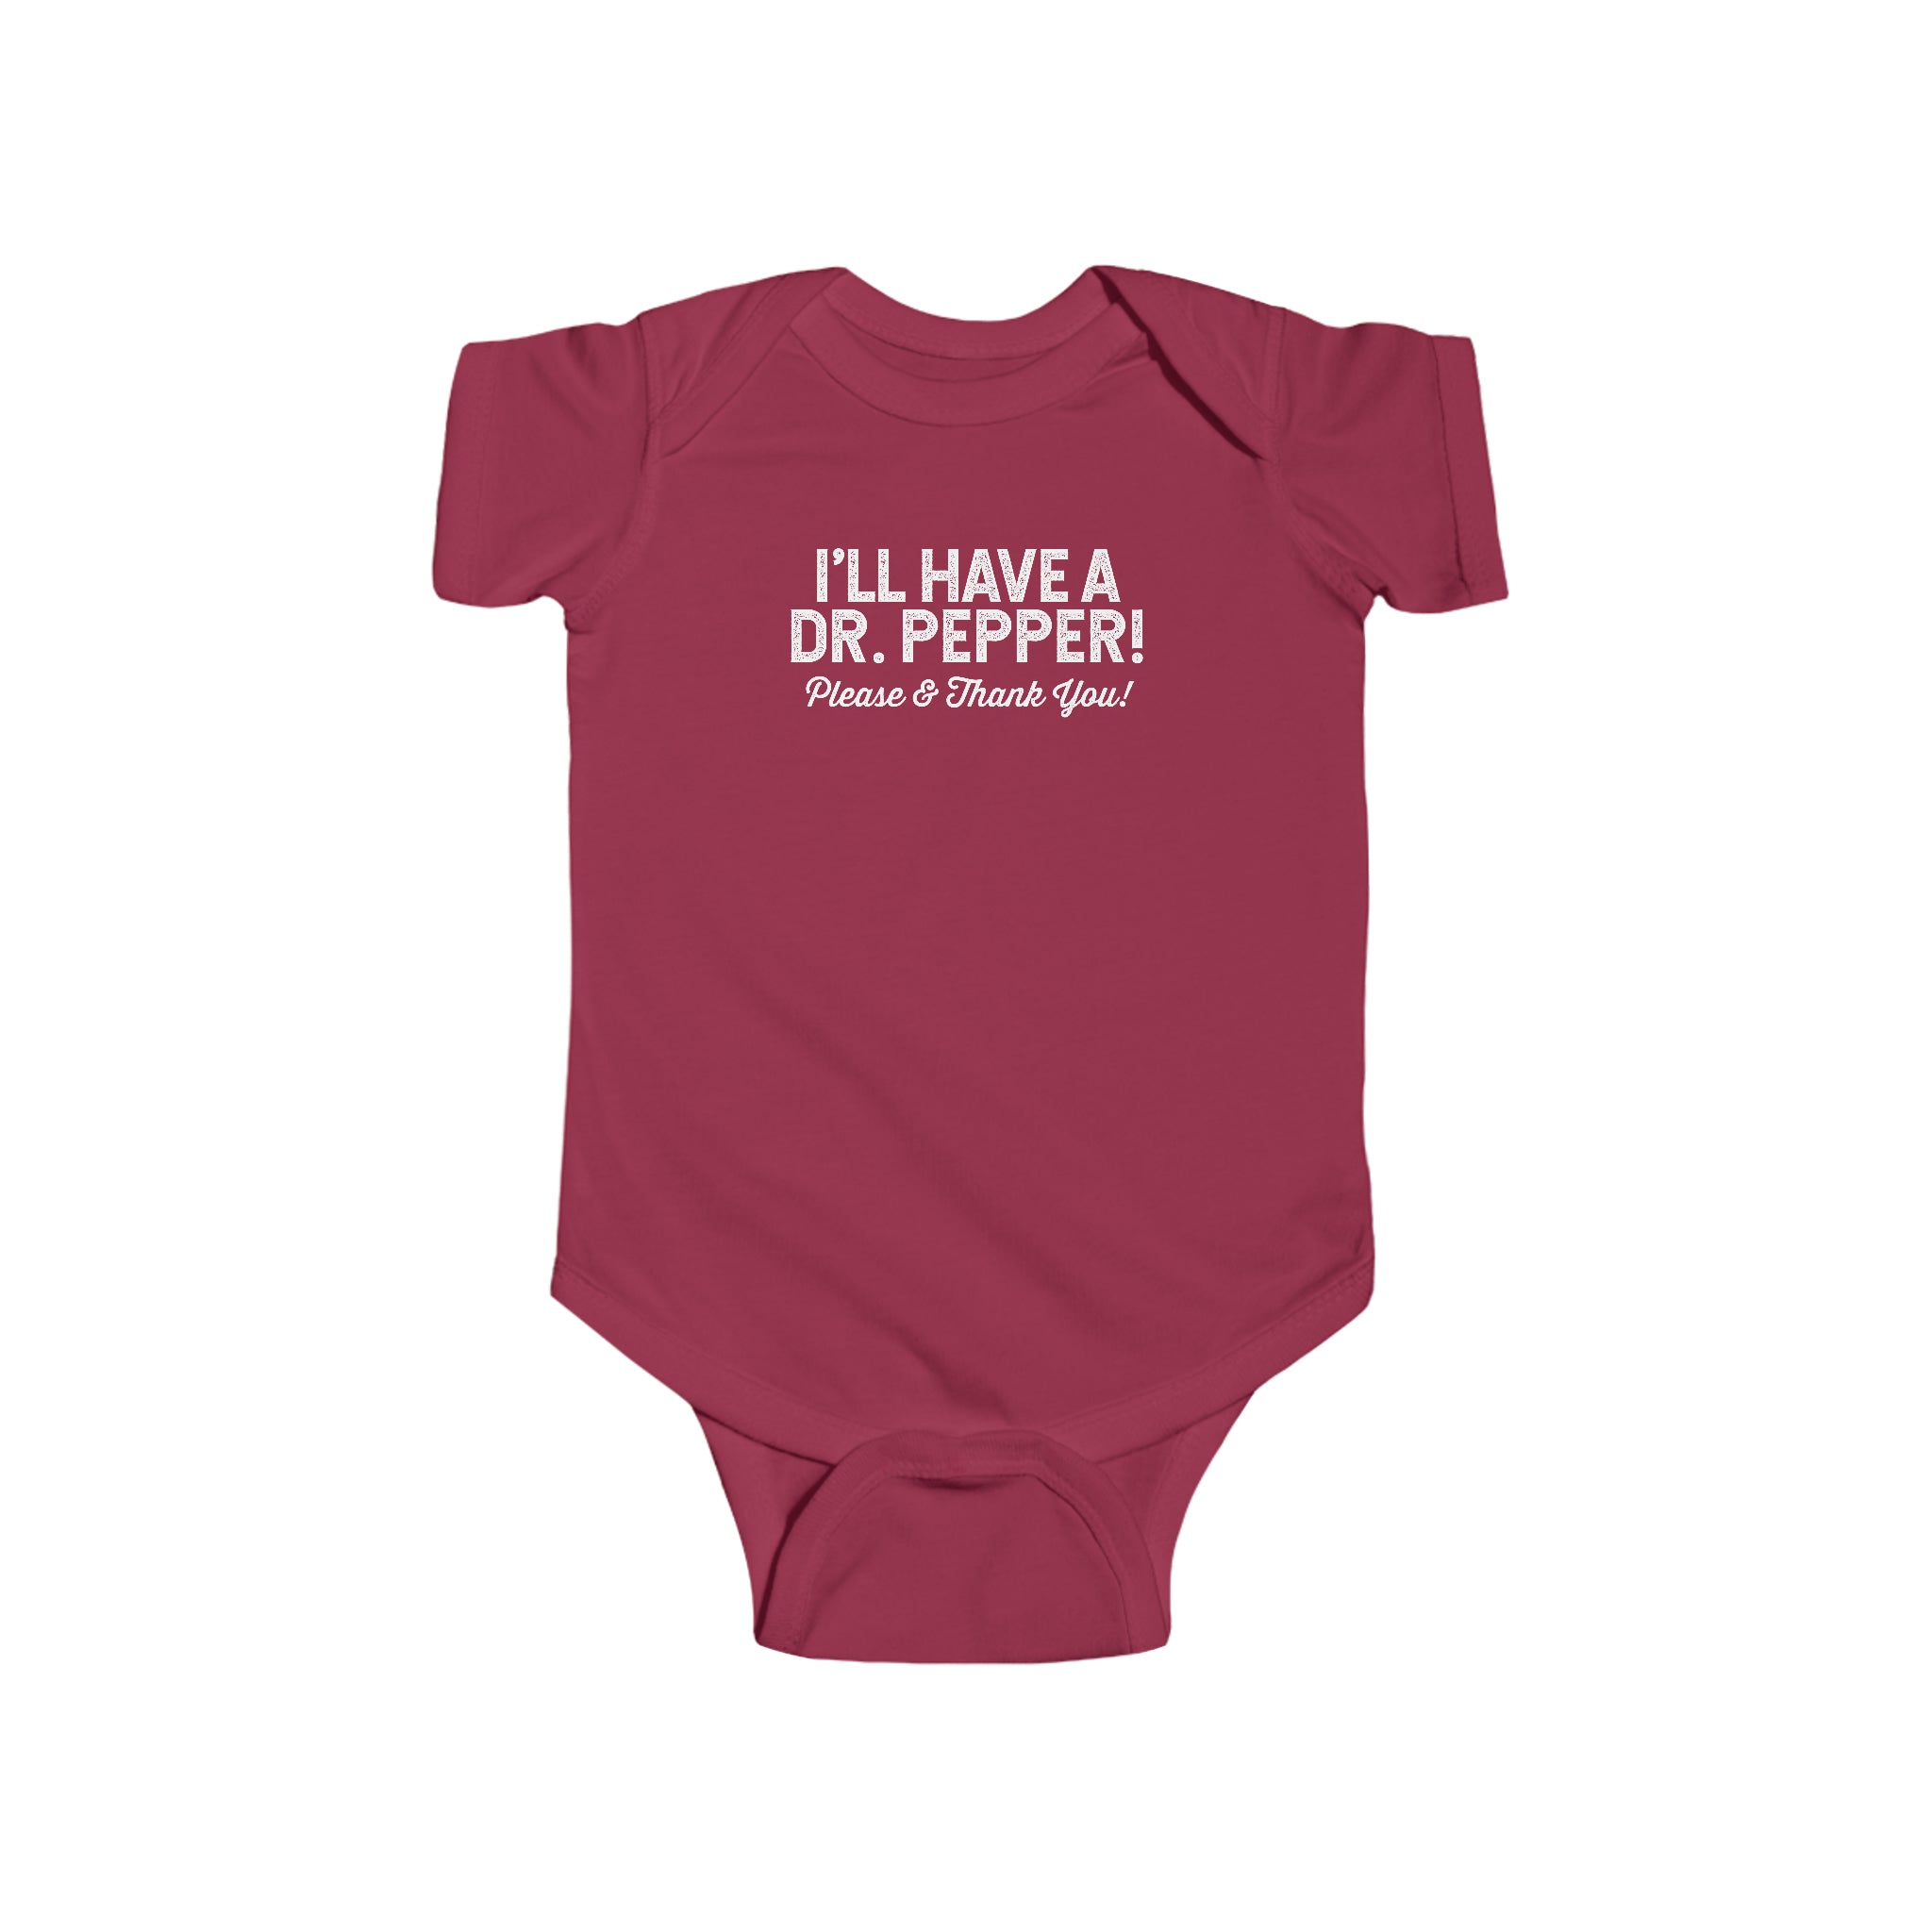 I'll Have a Dr. Pepper Onesie